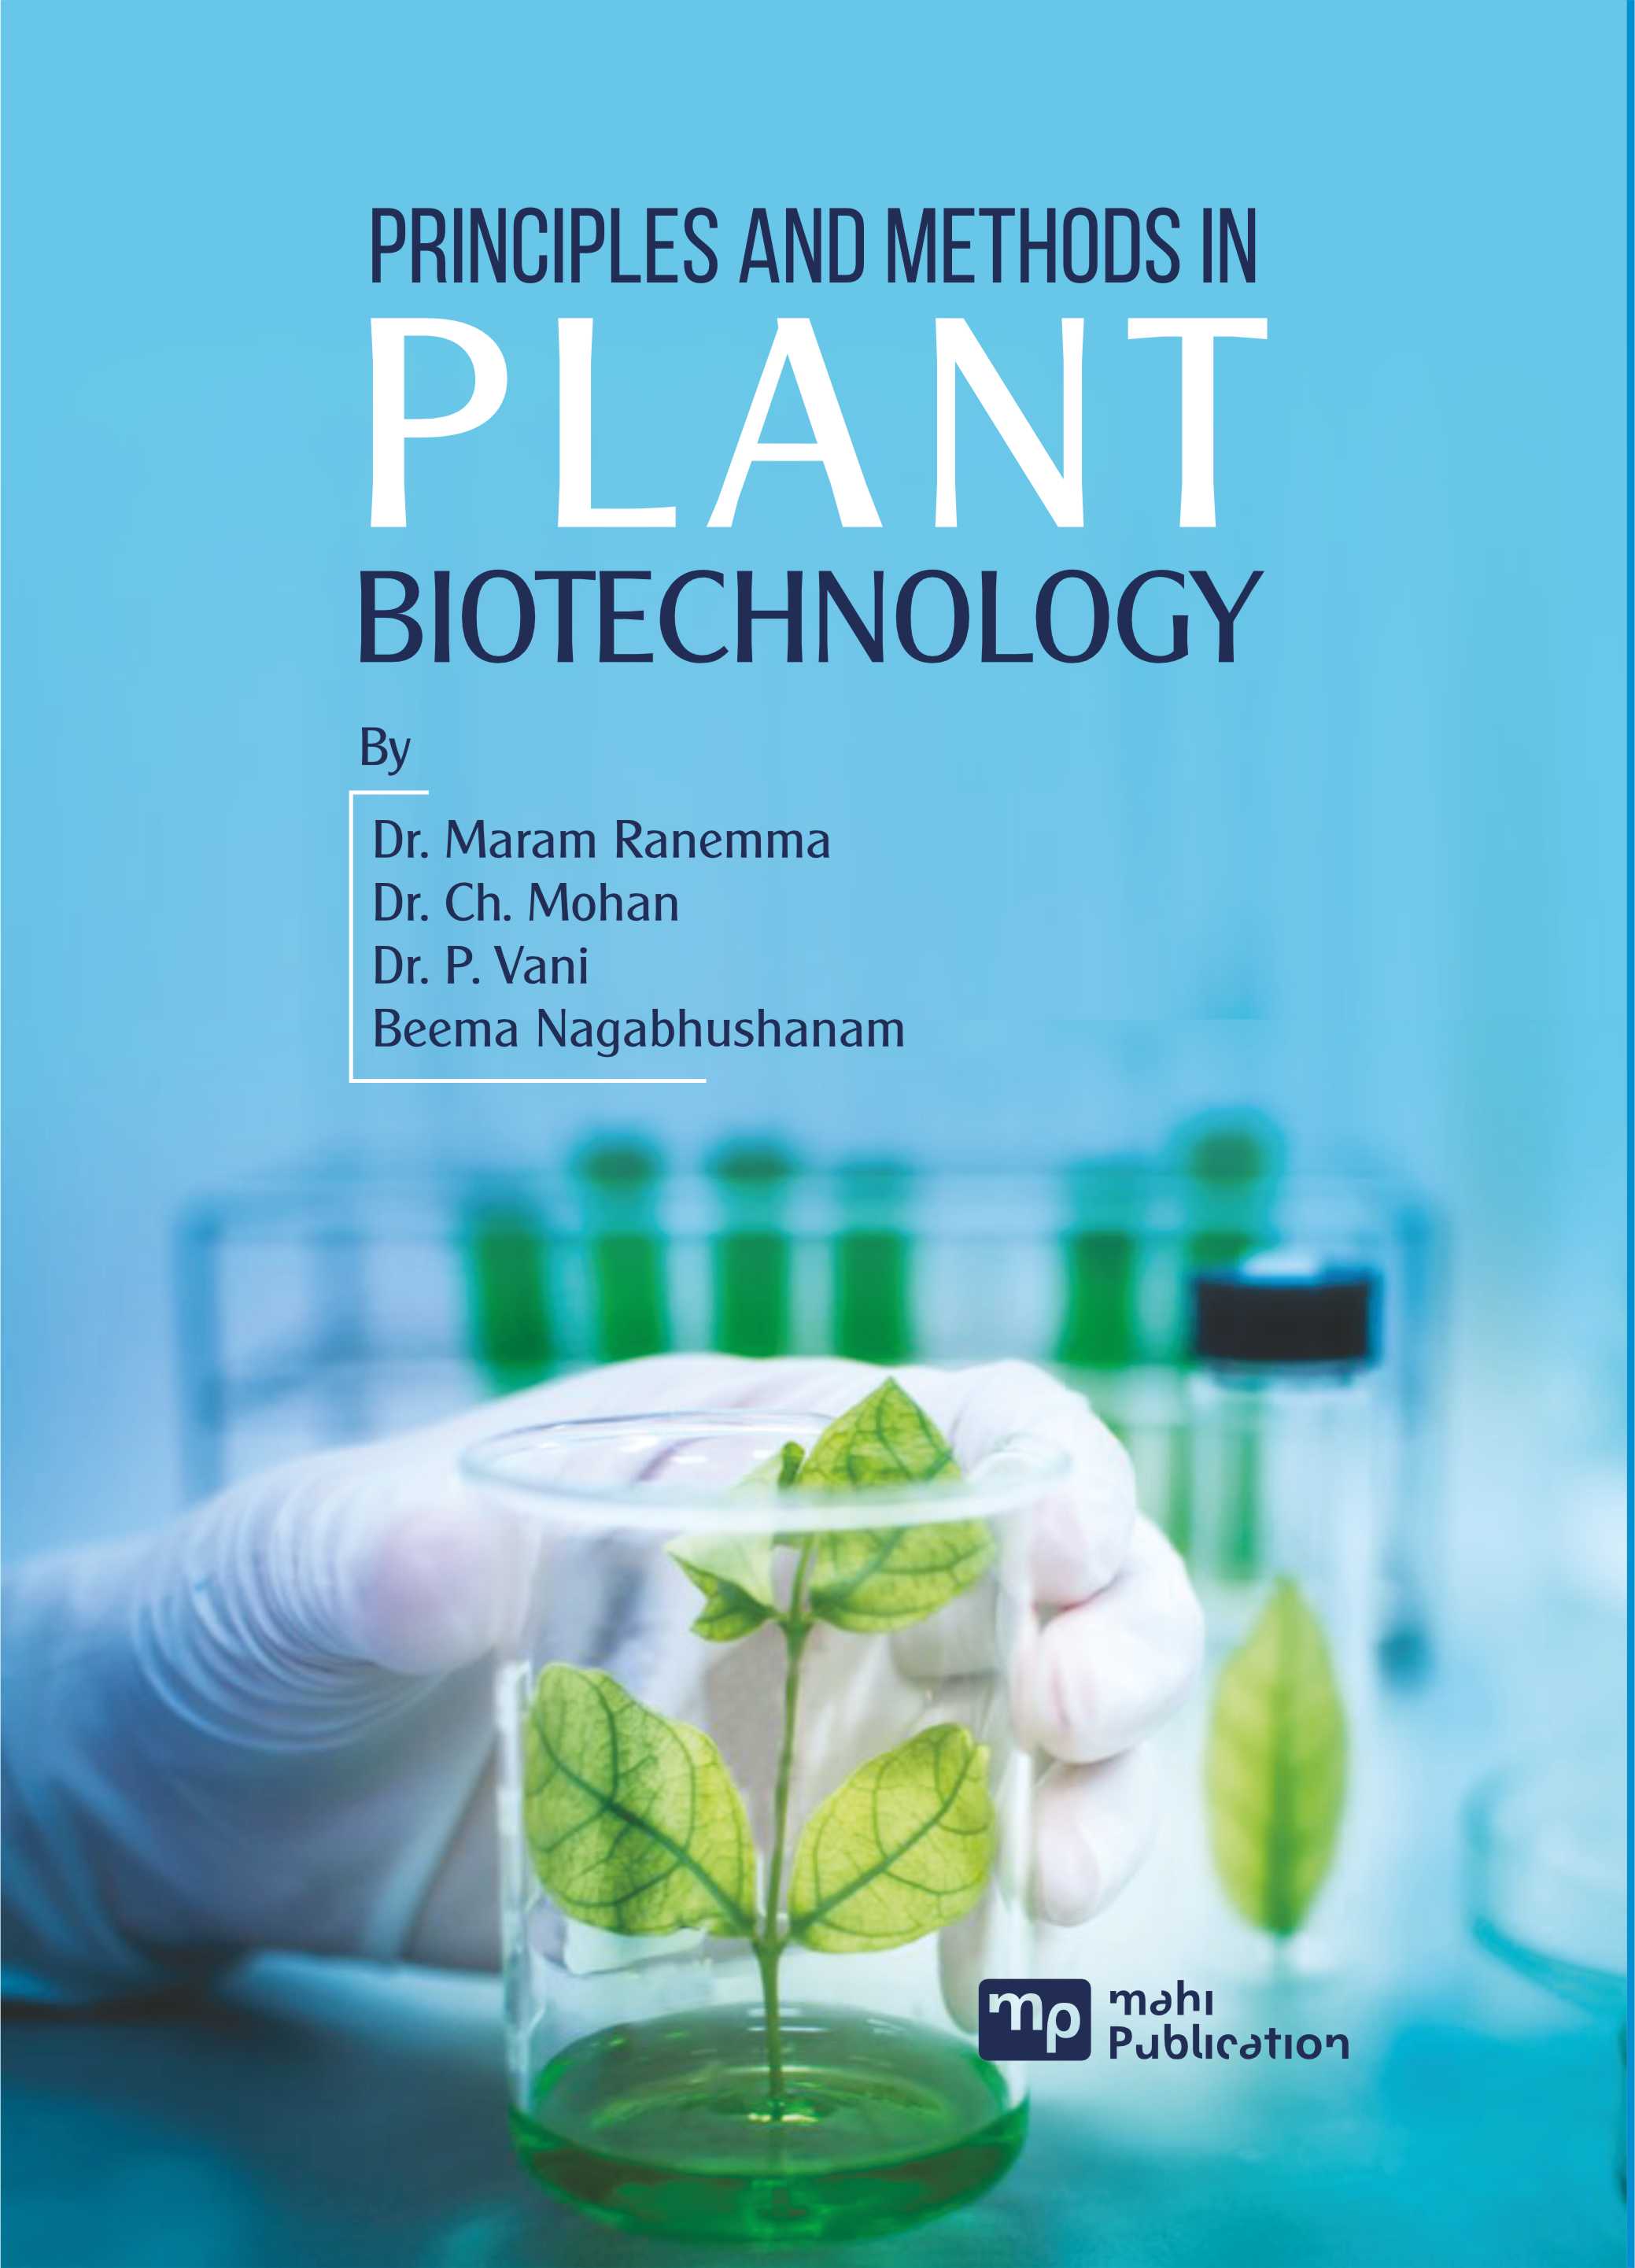 Priniciples and methods in plant biotechnology